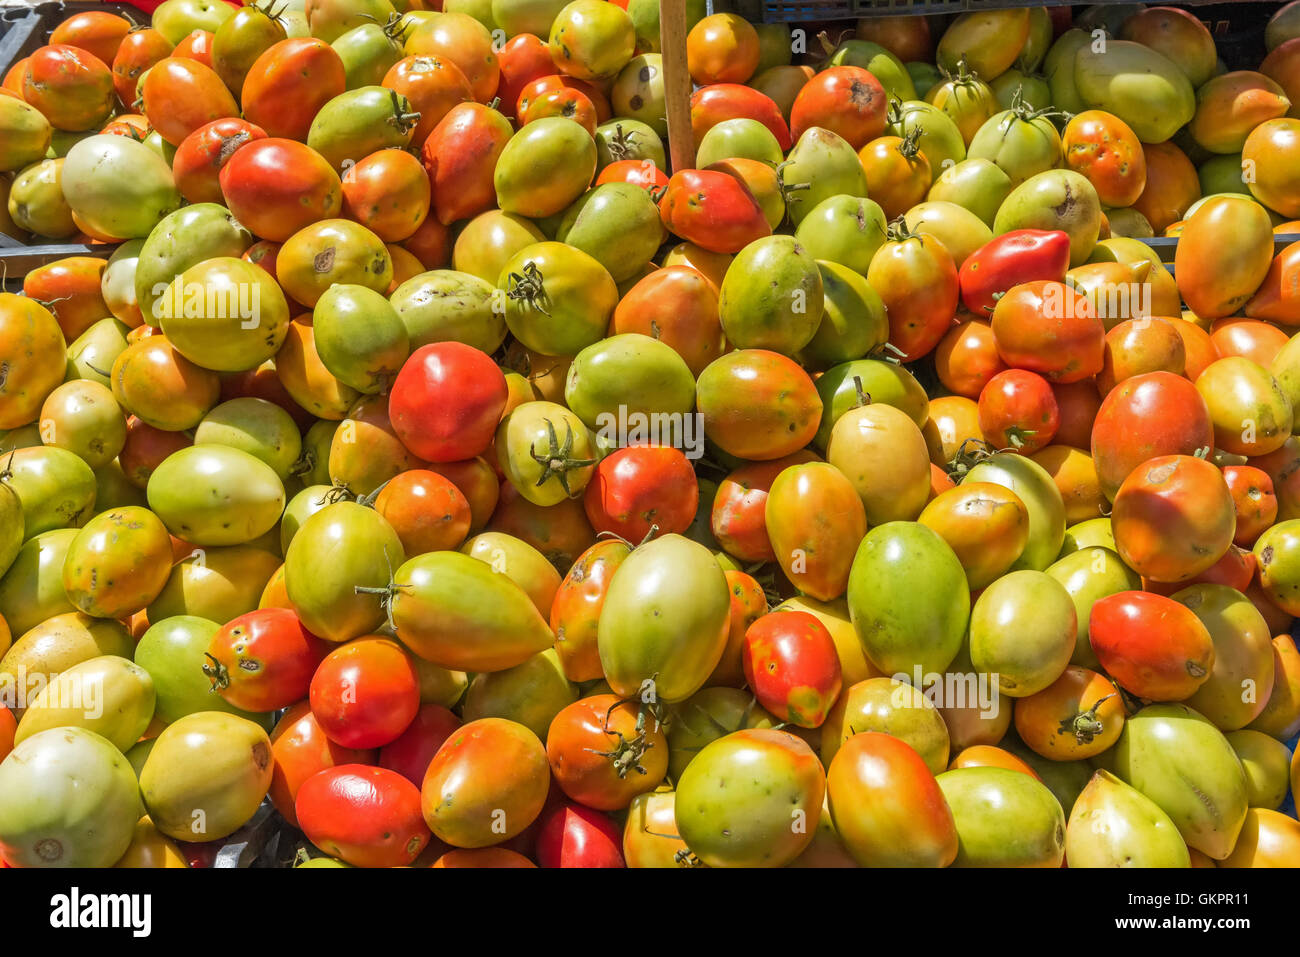 Egg-shaped tomatoes at a market in Palermo, Sicily Stock Photo